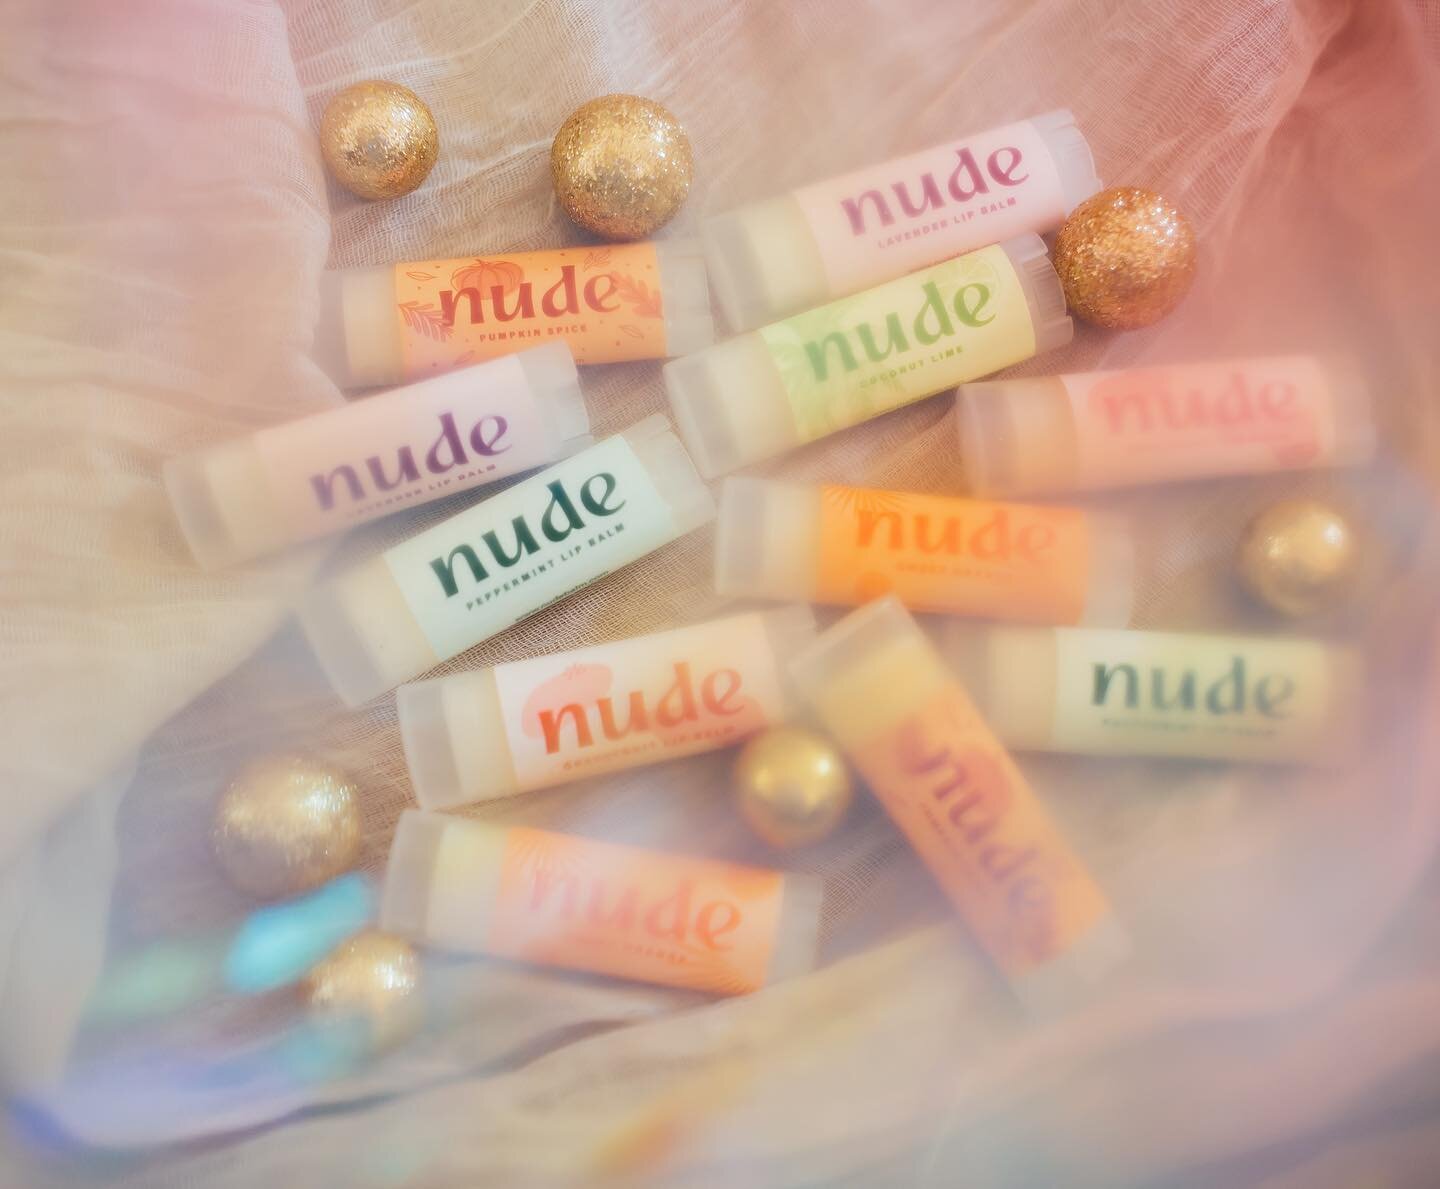 Attention! 👀 Time to introduce this beautiful new logo and design for nude balm on the feed! (It&rsquo;s also time to start getting these stocking stuffers ordered to make it to you by Christmas.)

Available: Grapefruit, Sweet Orange, Peppermint, La